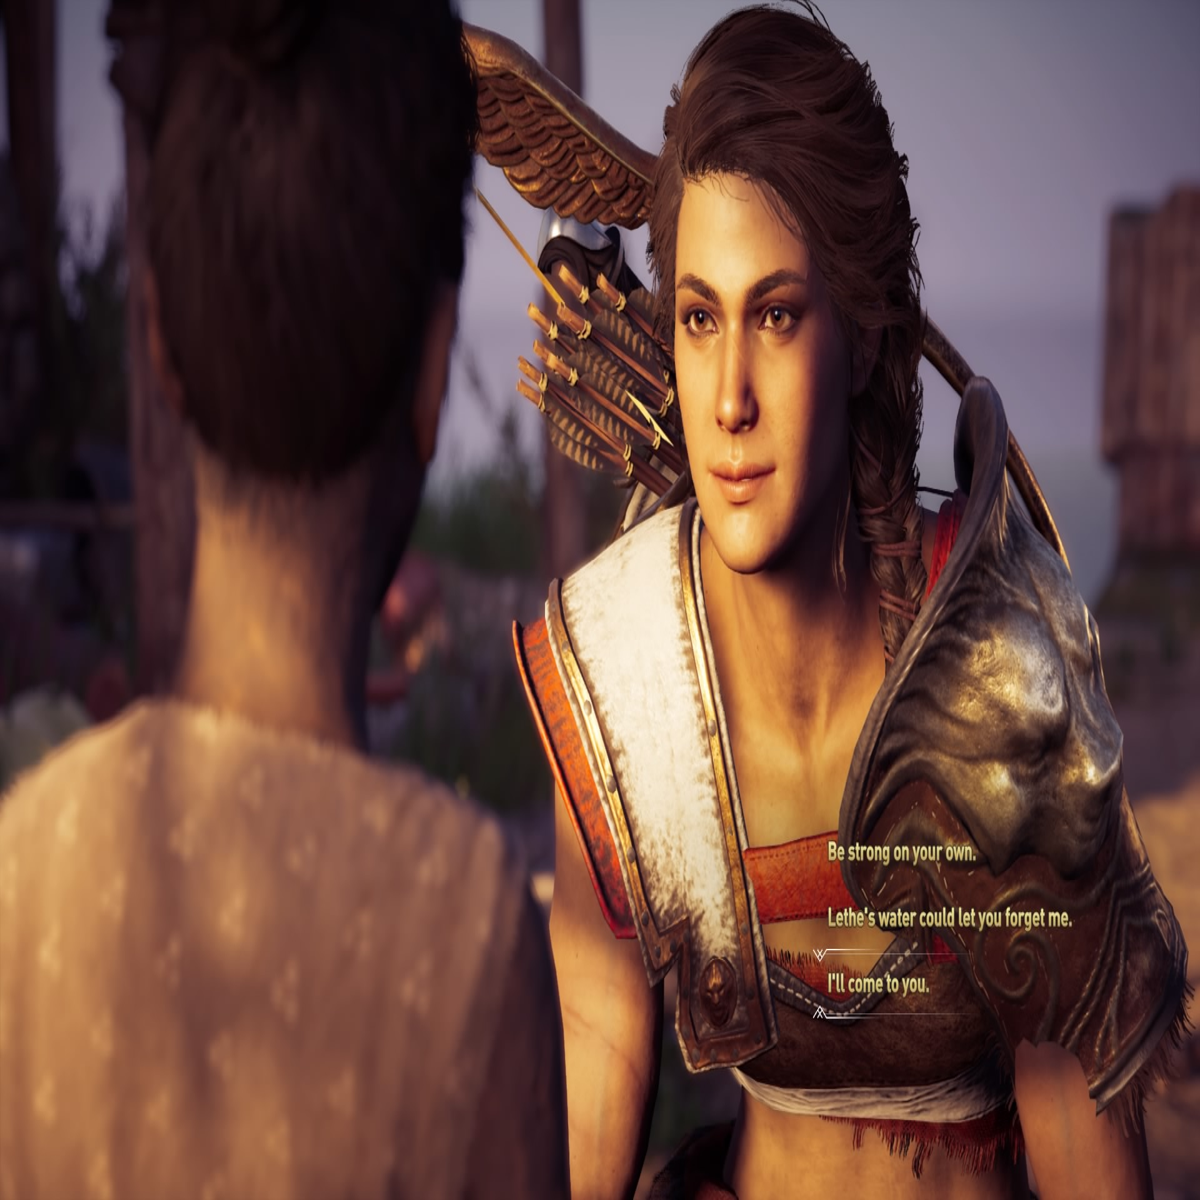 Kassandra was supposed to be lead in Assassin's Creed Odyssey, but Ubisoft said sell" | VG247